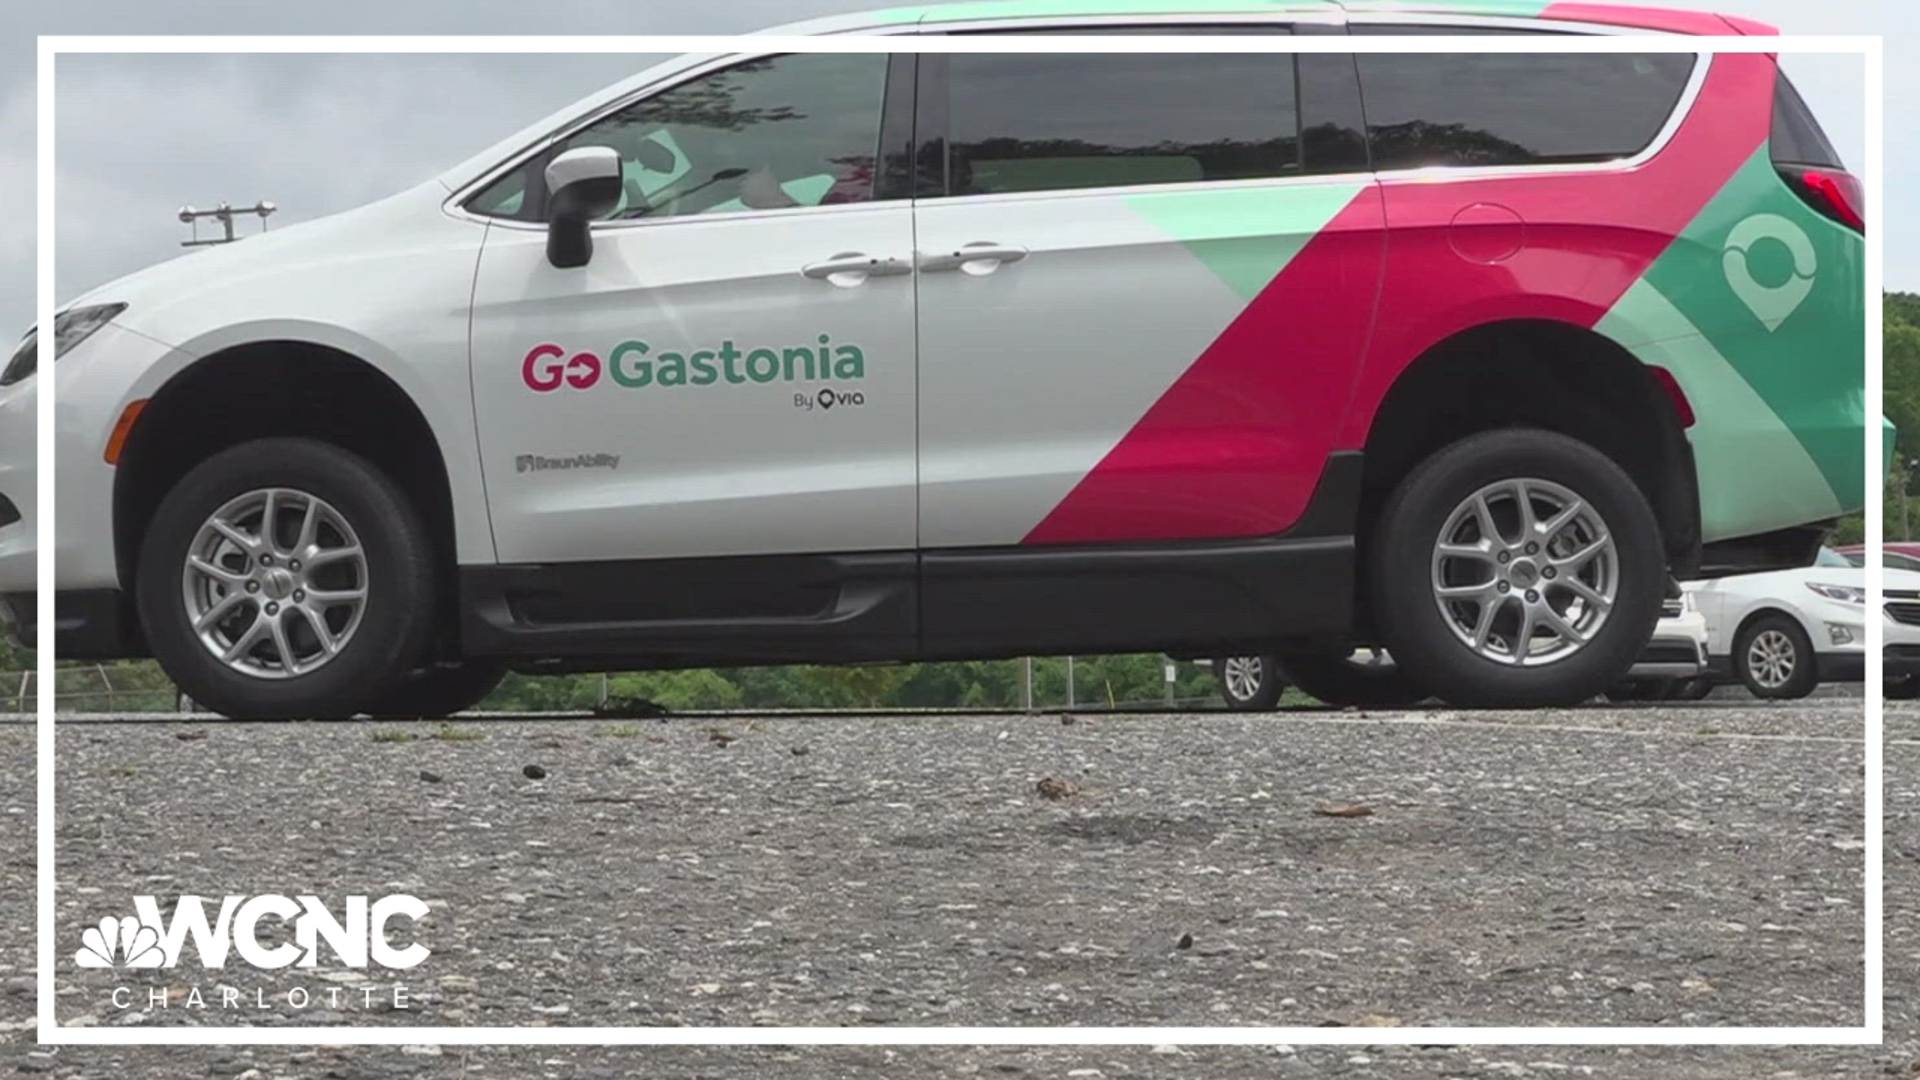 The city of Gastonia is getting rid of public buses and moving to an on-demand transit service.